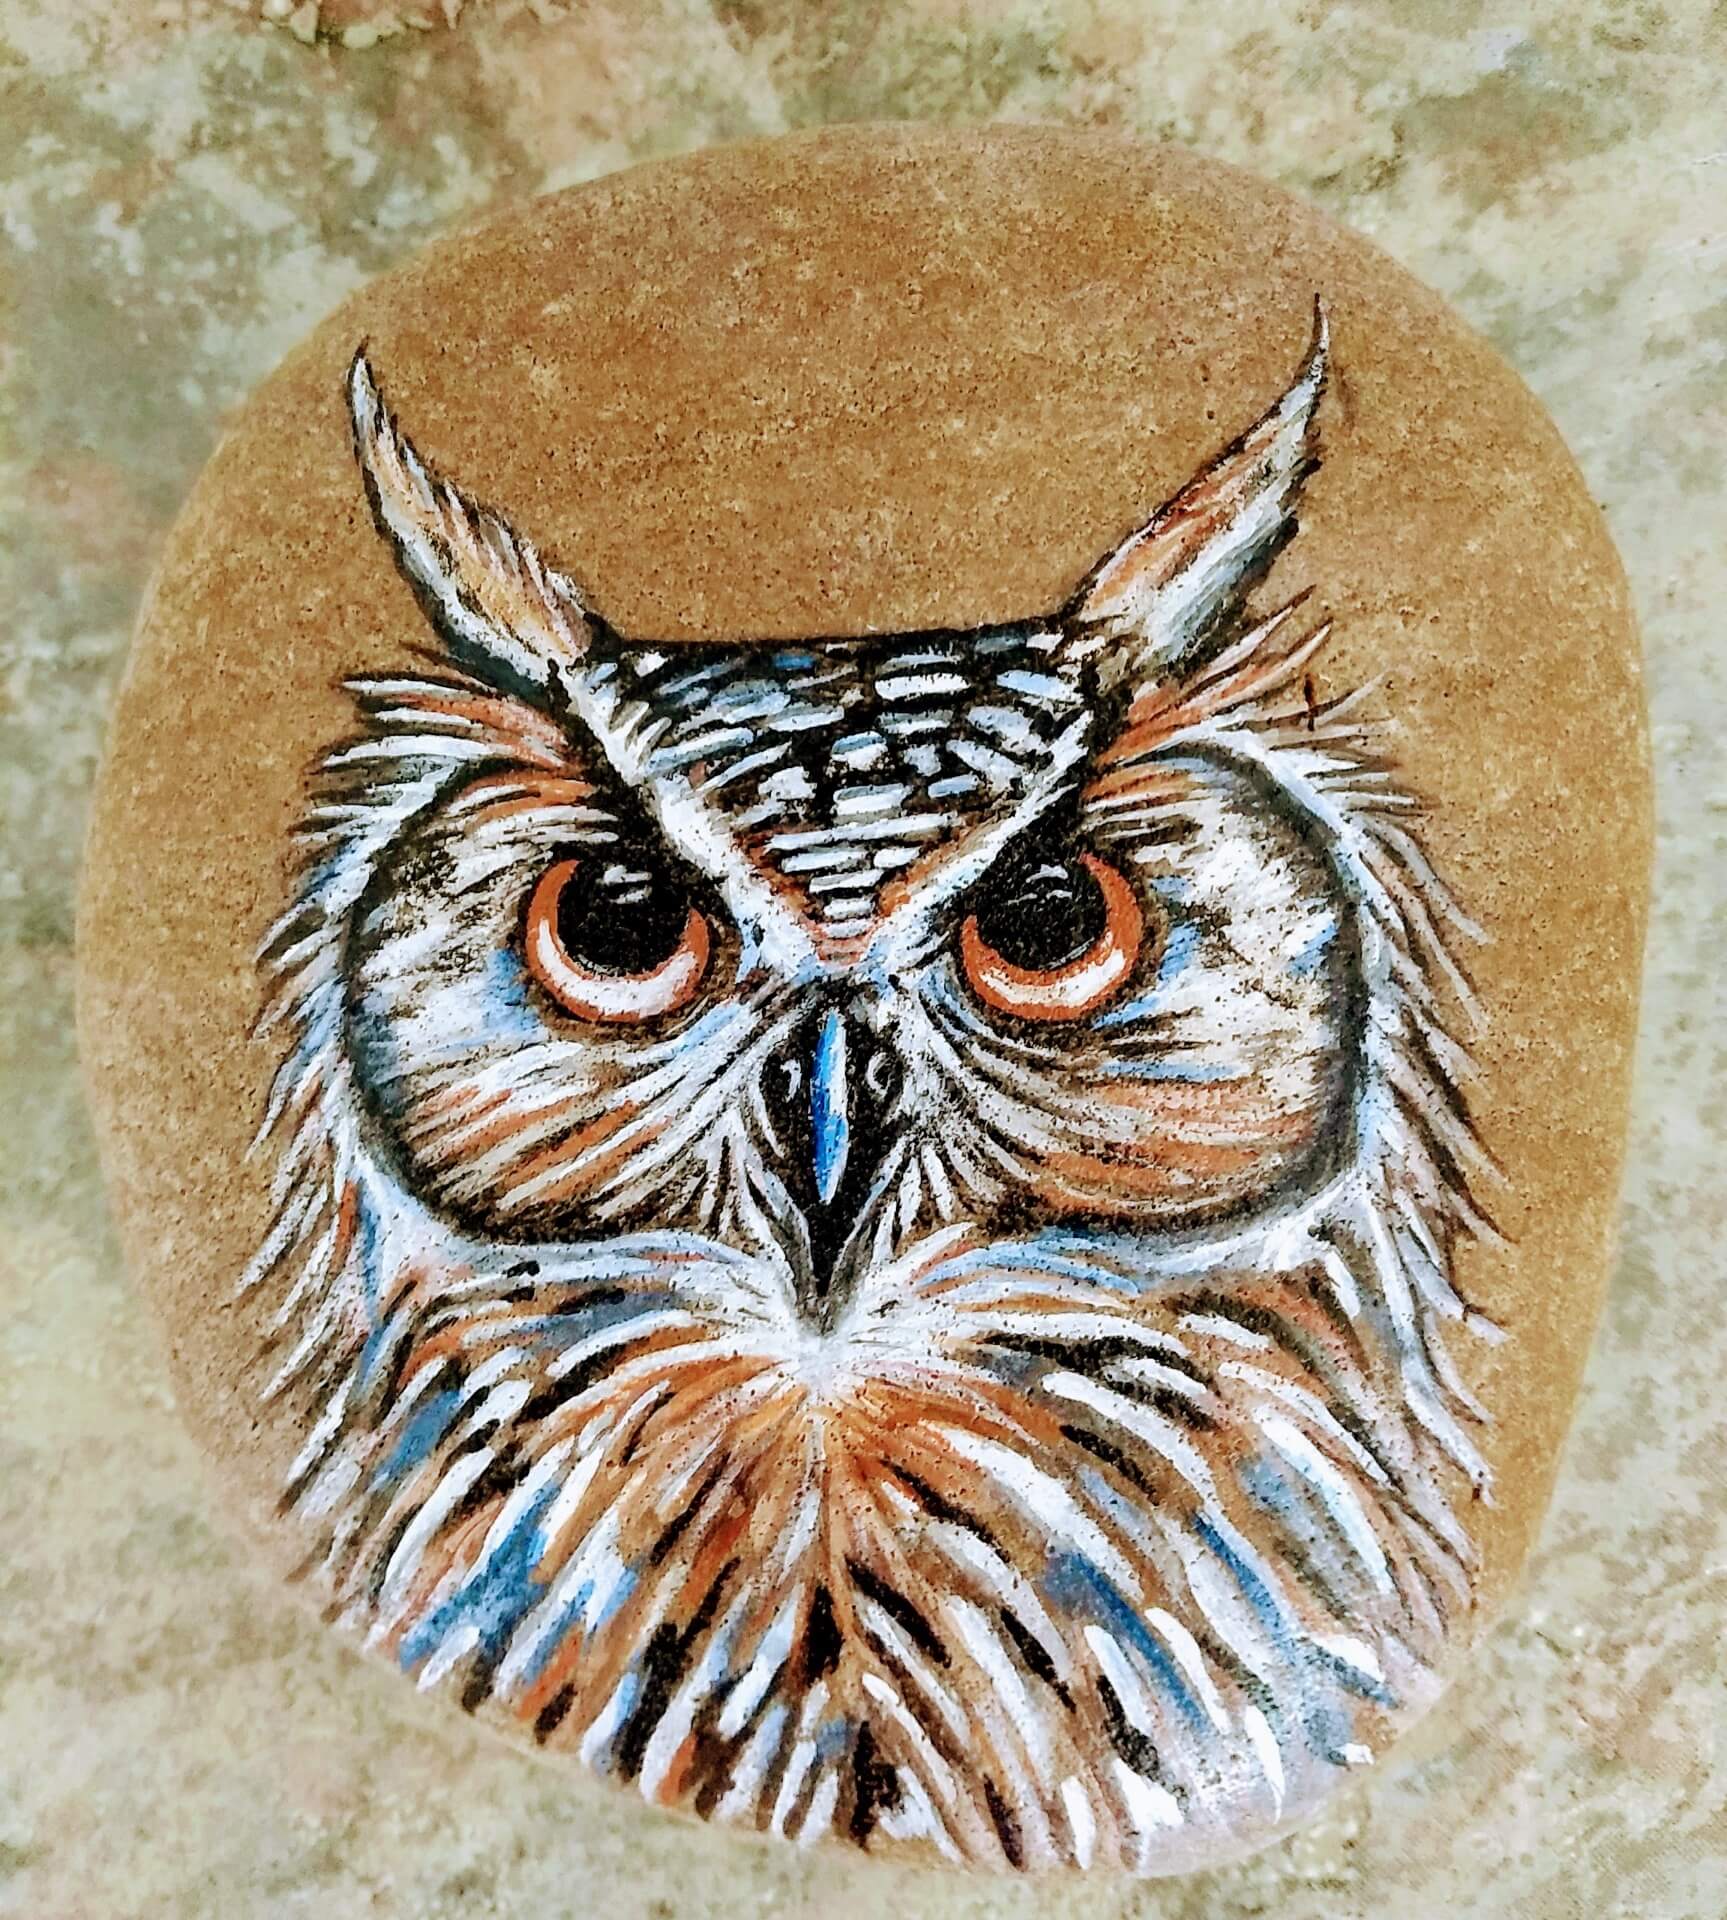 The Wise Owl 7x6 inch SOLD